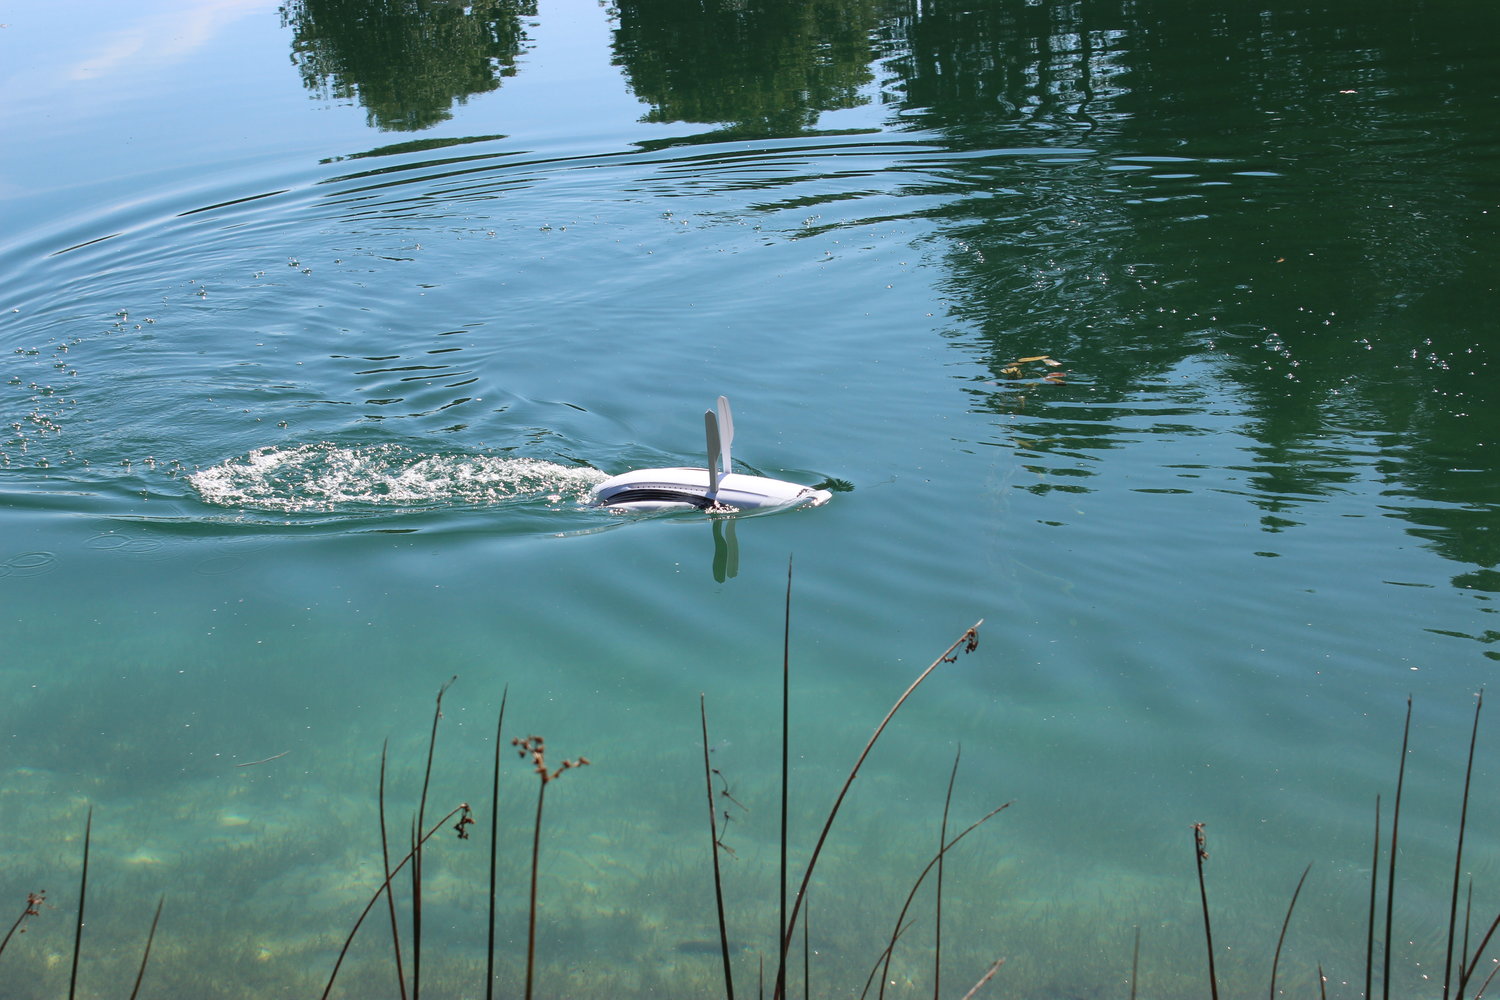 Students in a SUNY Morrisville study used a Power Dolphin surface drone, shown above, which yielded some of the best images during the aquatic drones and turtle study.